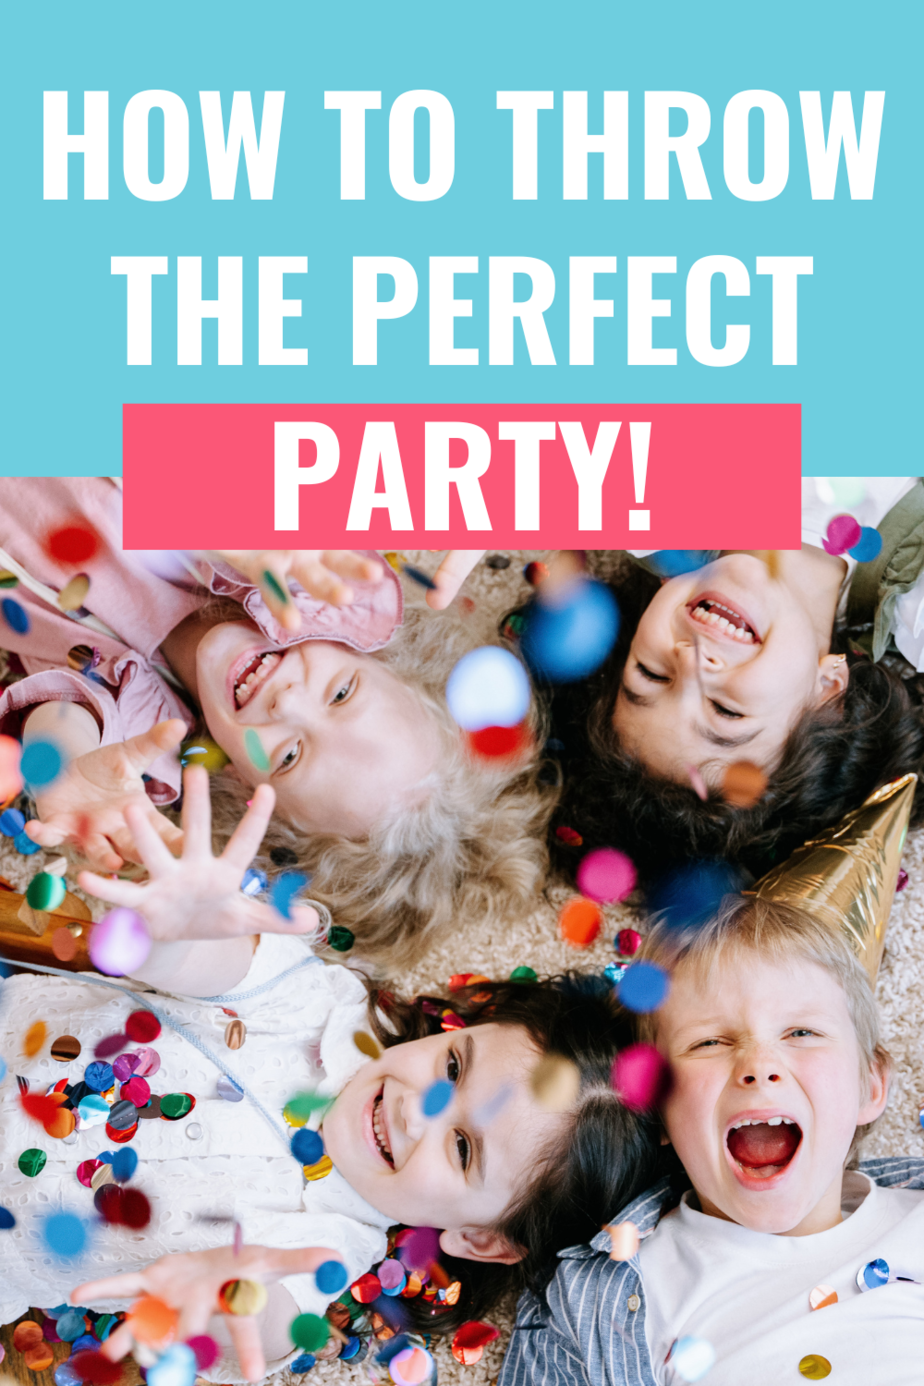 How to plan a birthday party for your kids - the ultimate planning guide!